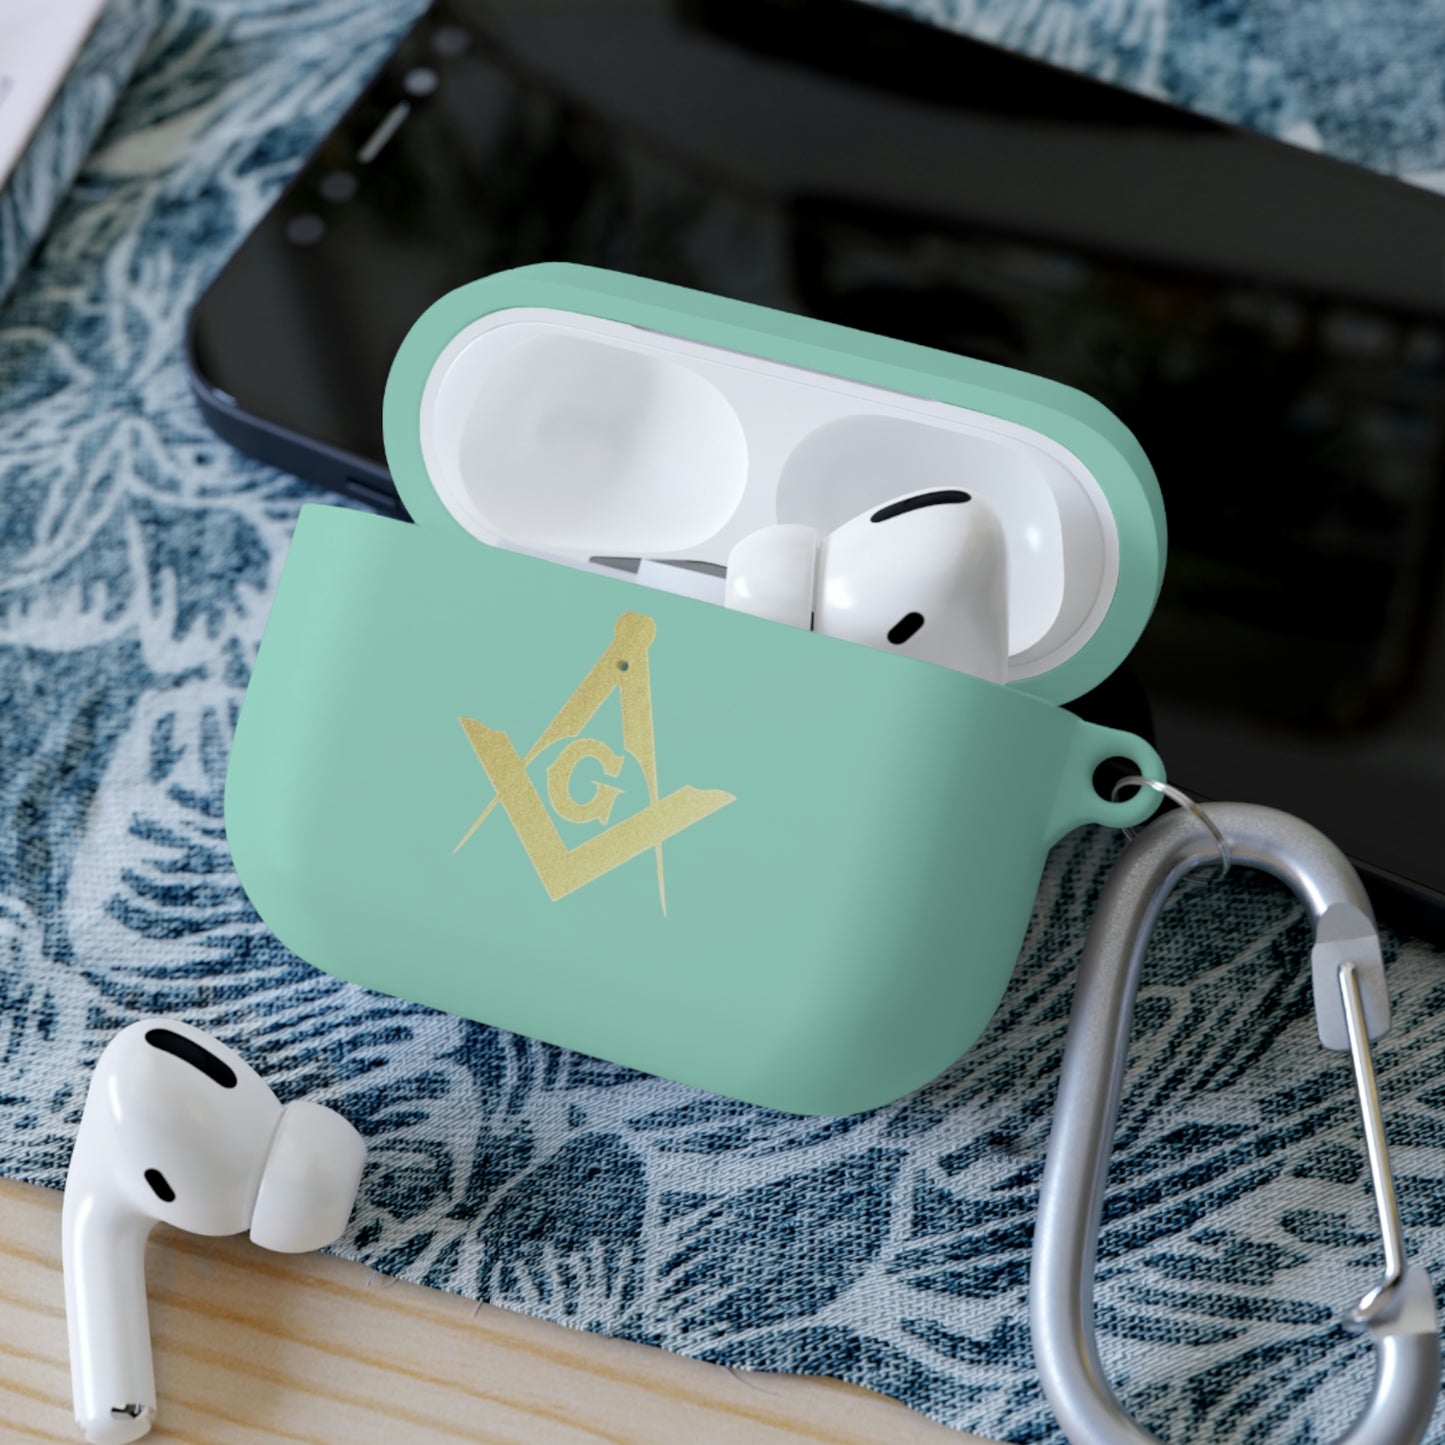 Square and Compasses AirPods and AirPods Pro Case Cover